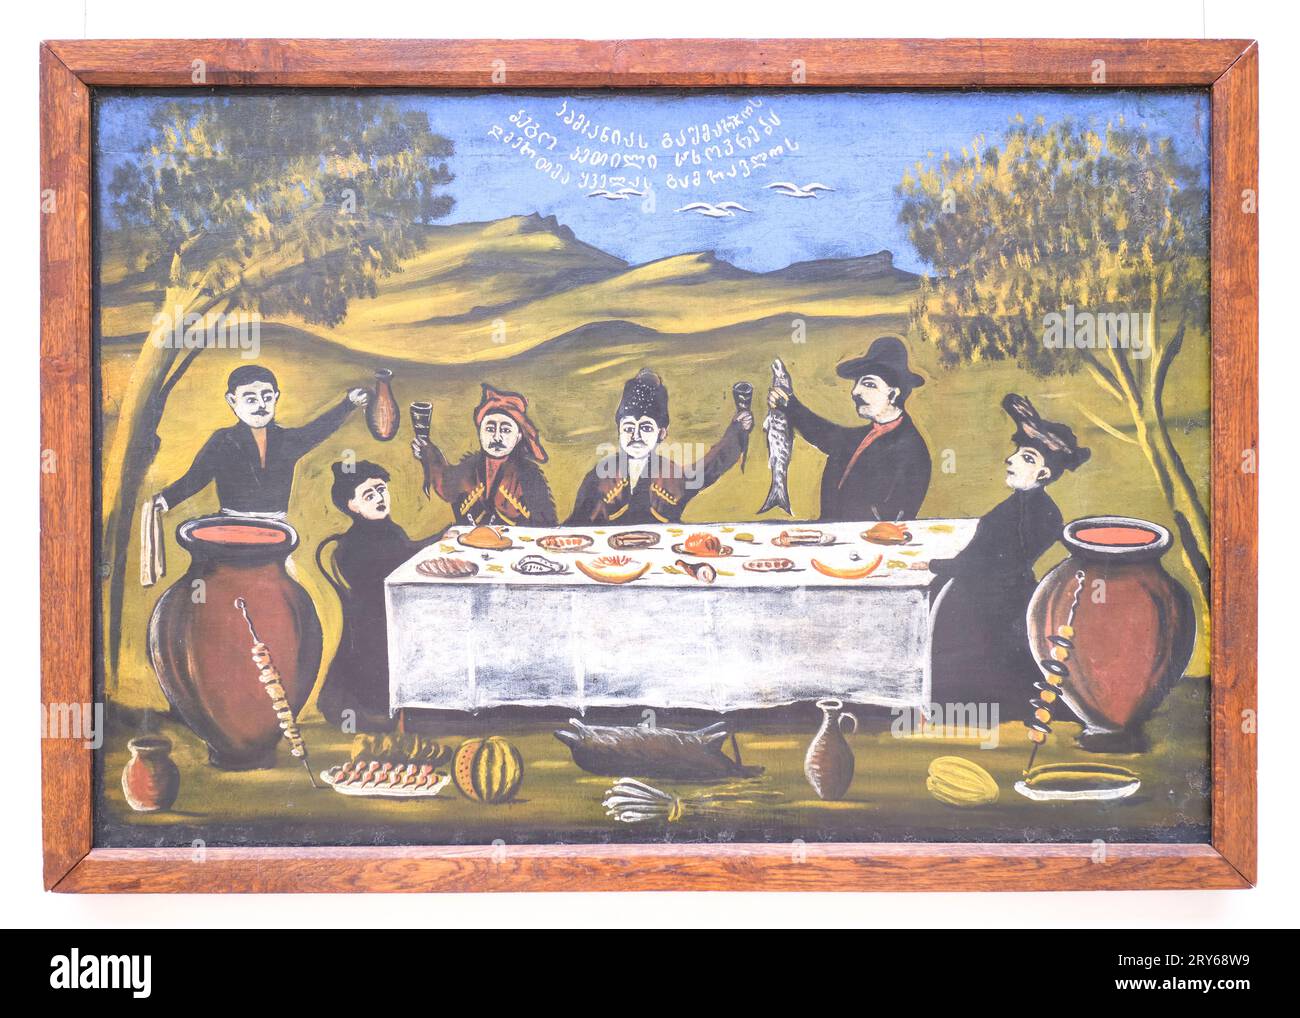 A classic, iconic painting by the artist, Niko Pirosmanashvili, of a rural, outdoor picnic celebration with fish, boar, kebab, melon and drink. In Tbi Stock Photo